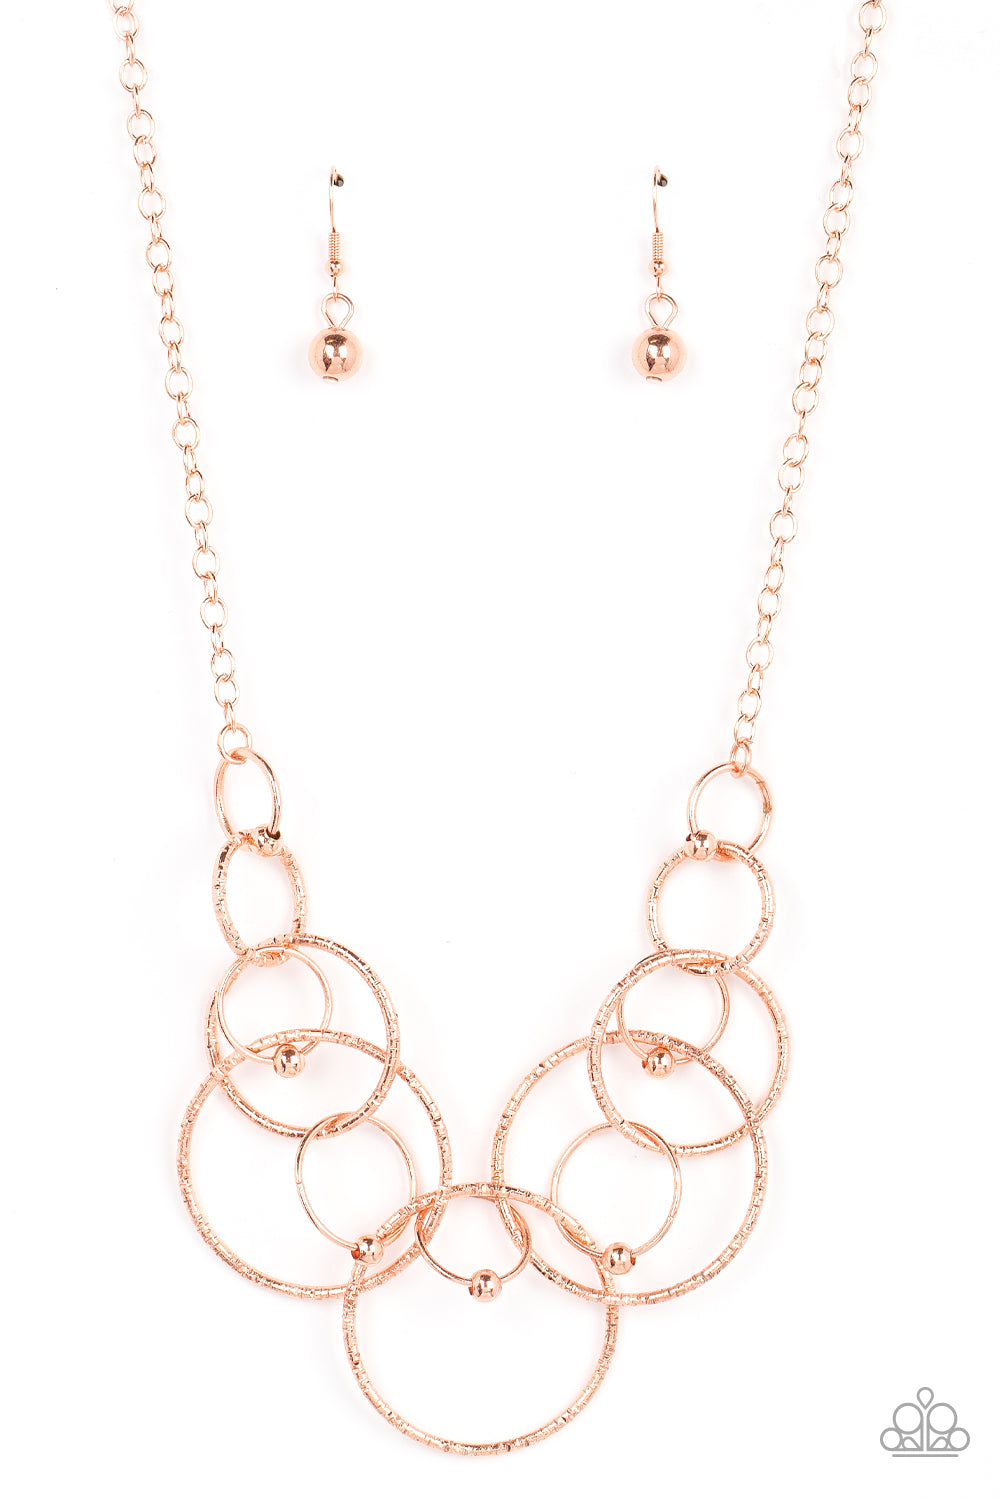 Encircled in Elegance Paparazzi Accessories Necklace with Earrings Copper